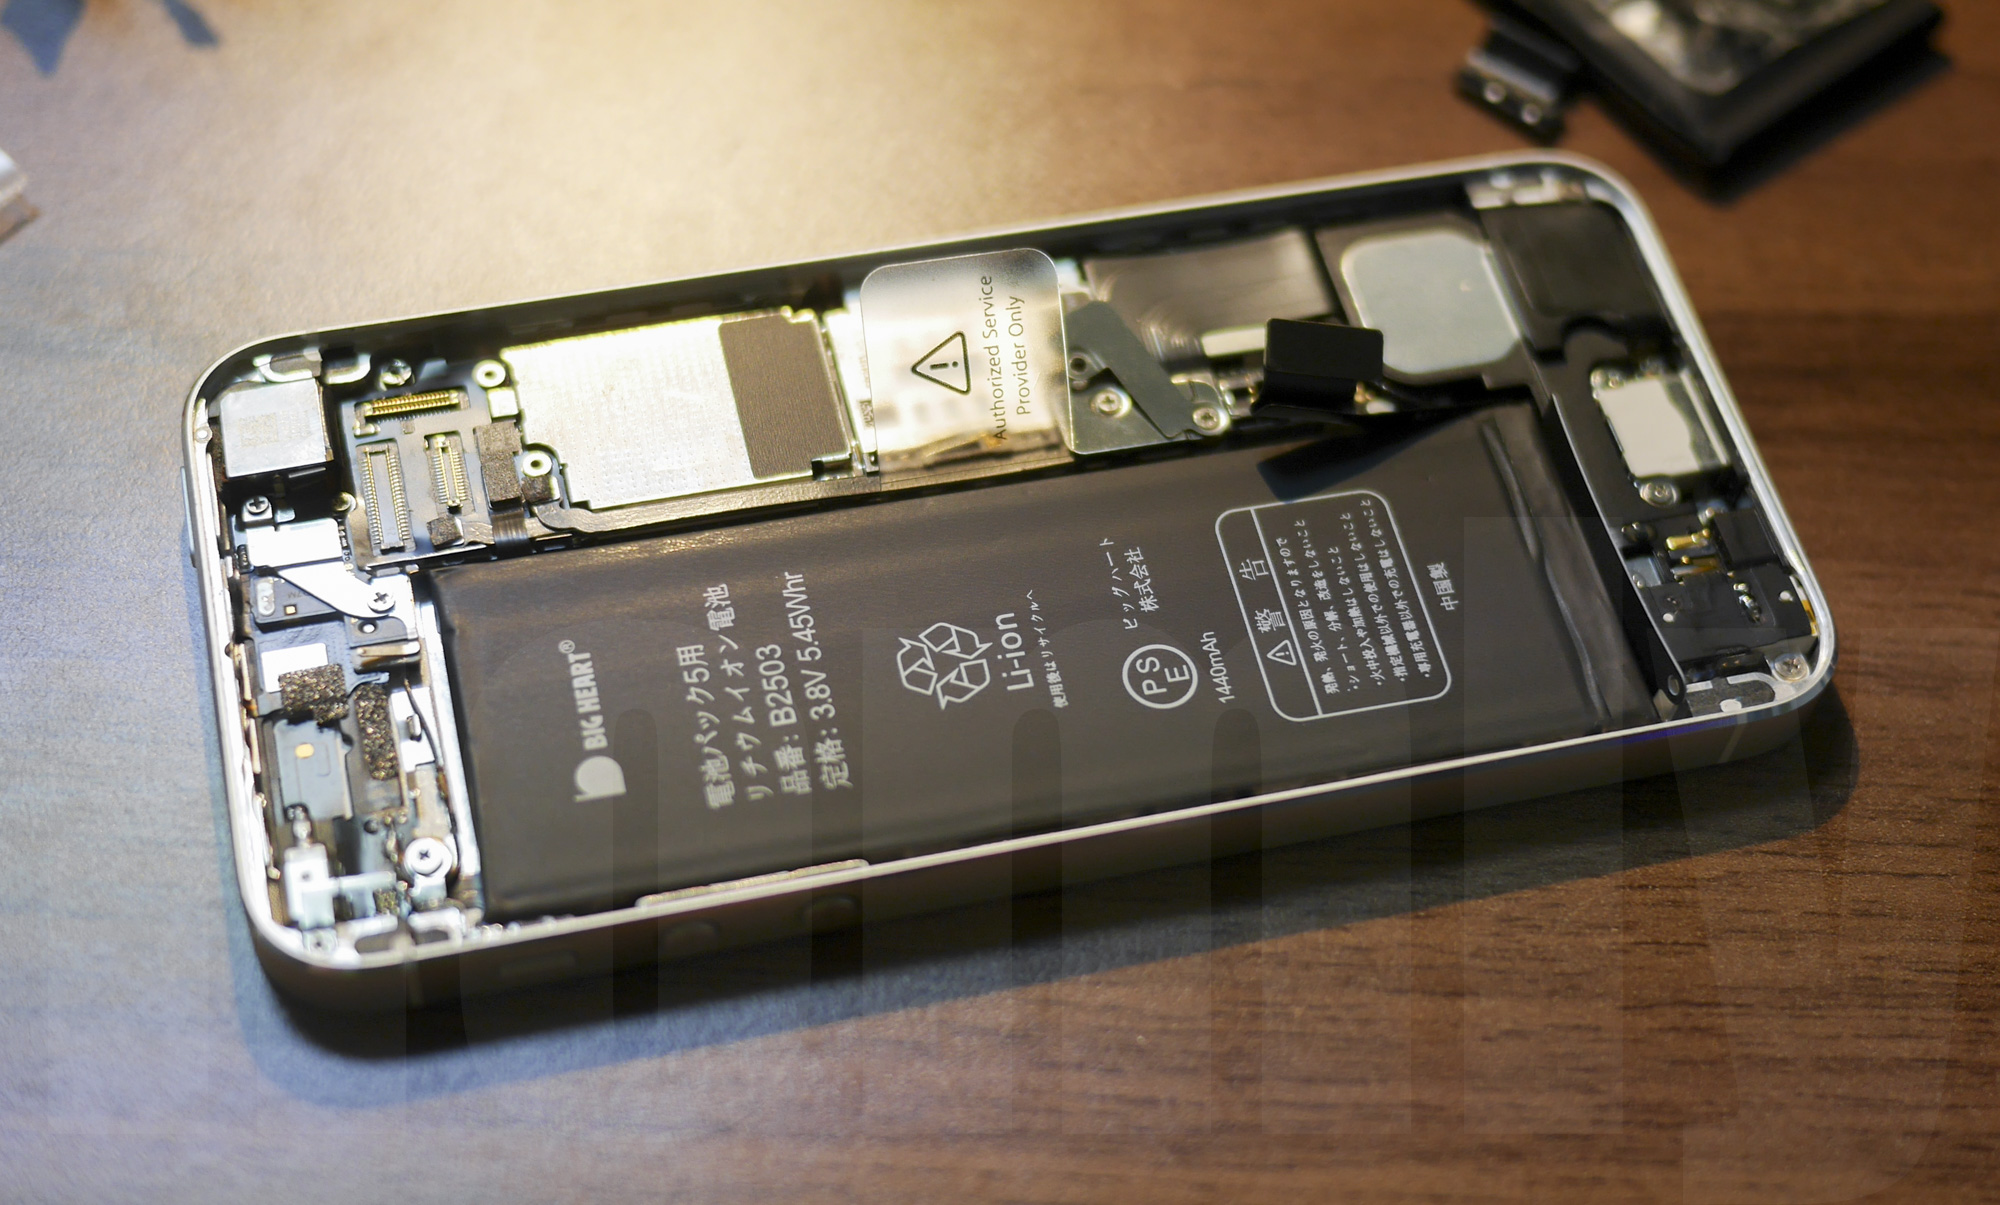 iPhone 5 Battery replacement: new battery and old battery